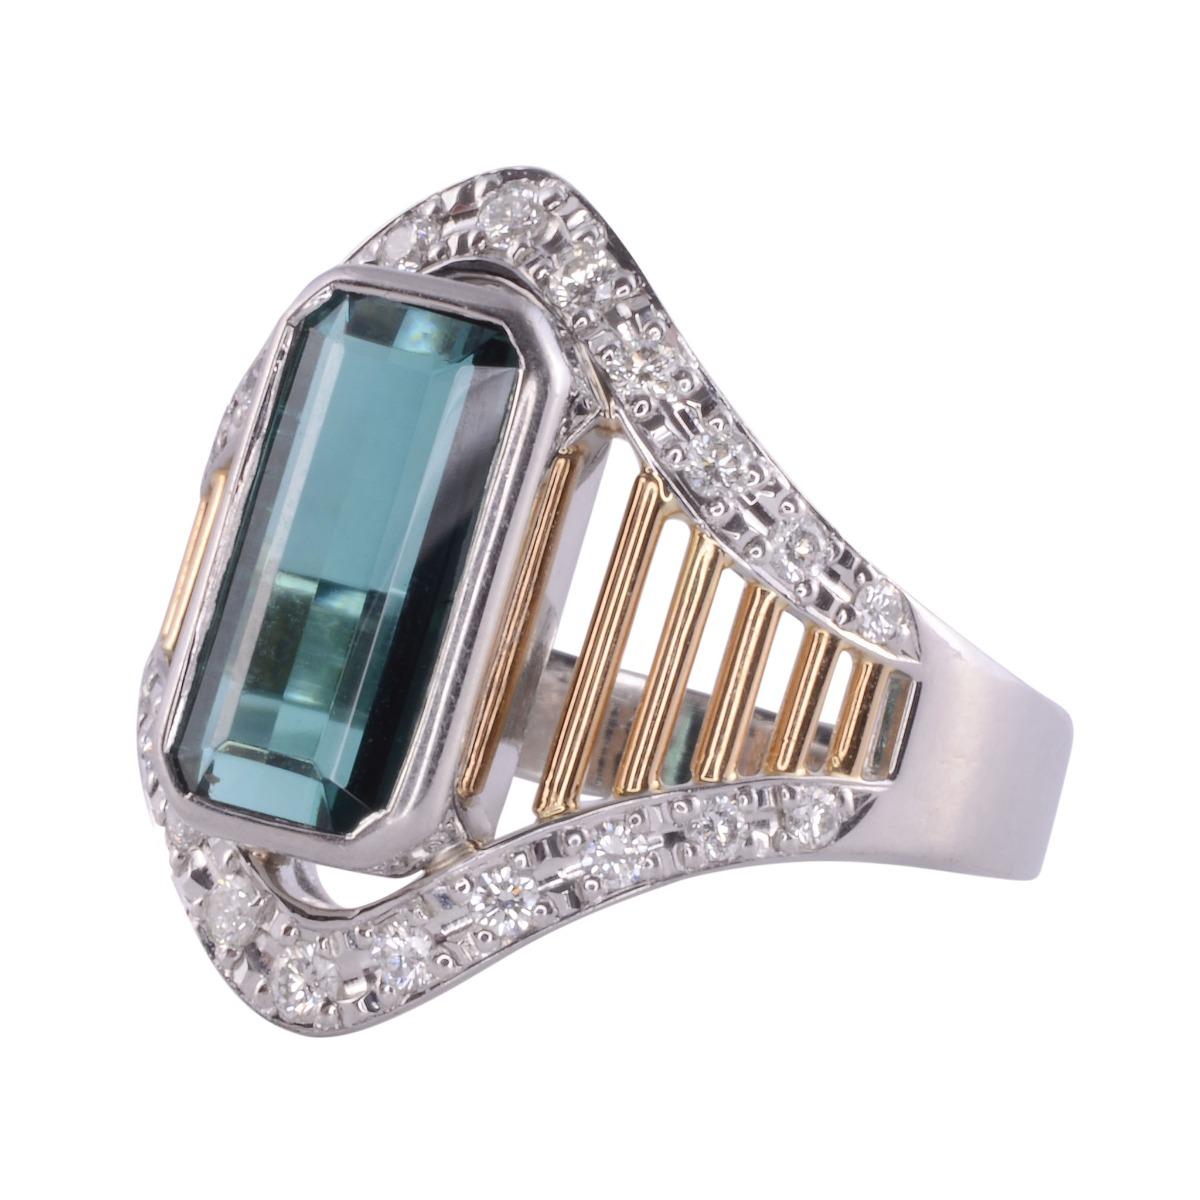 Estate American indicolite tourmaline ring, circa 2000. This 18 karat yellow gold and platinum ring features a fine quality emerald cut indicolite tourmaline at 2.75 carats. There are also 22 round brilliant accent diamonds having VS-SI clarity and